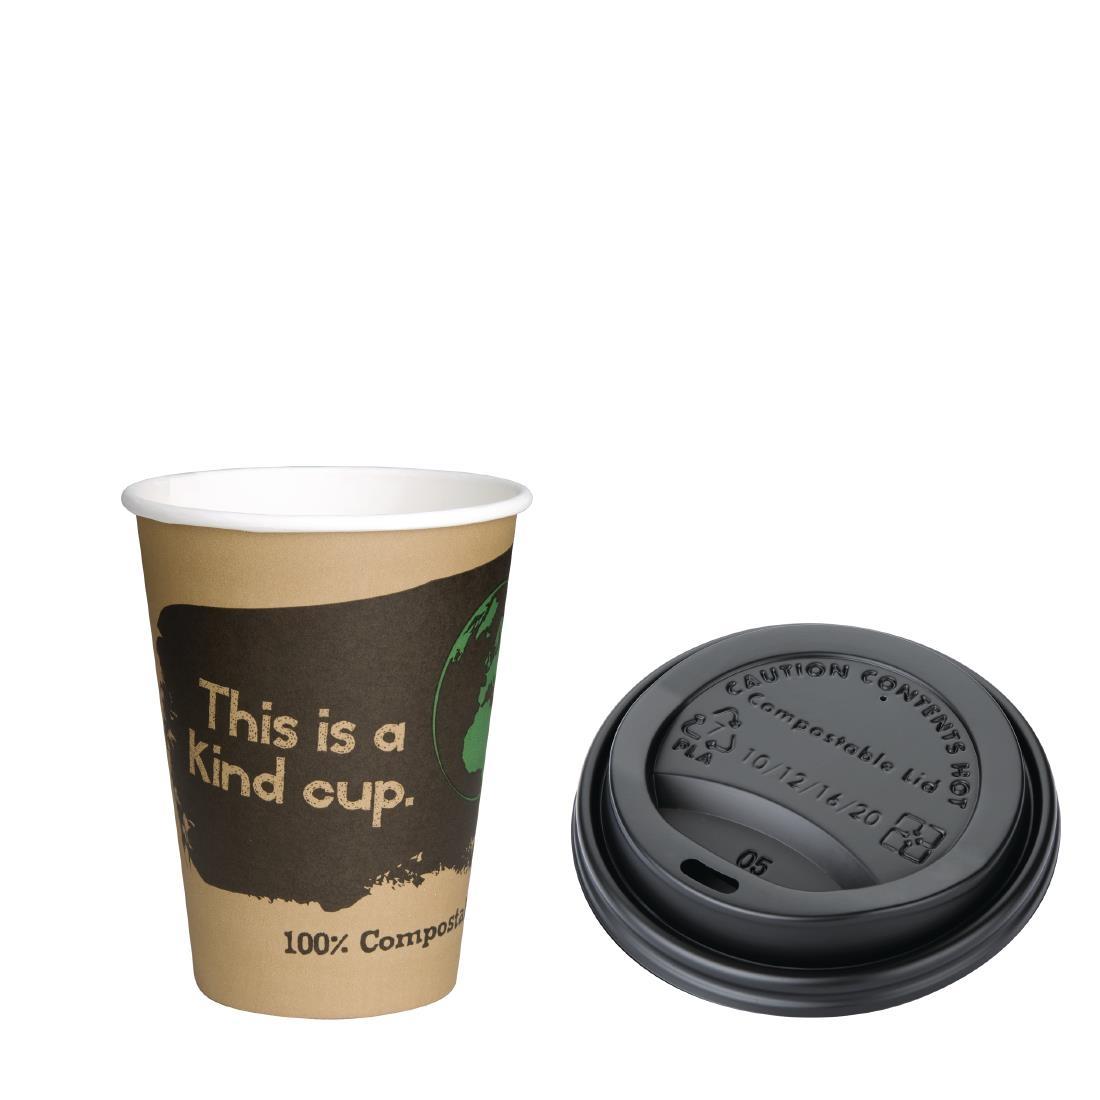 Fiesta Green 12oz Compostable Hot Cups and Lids Bundle (Pack of 50) - SA485  - 1